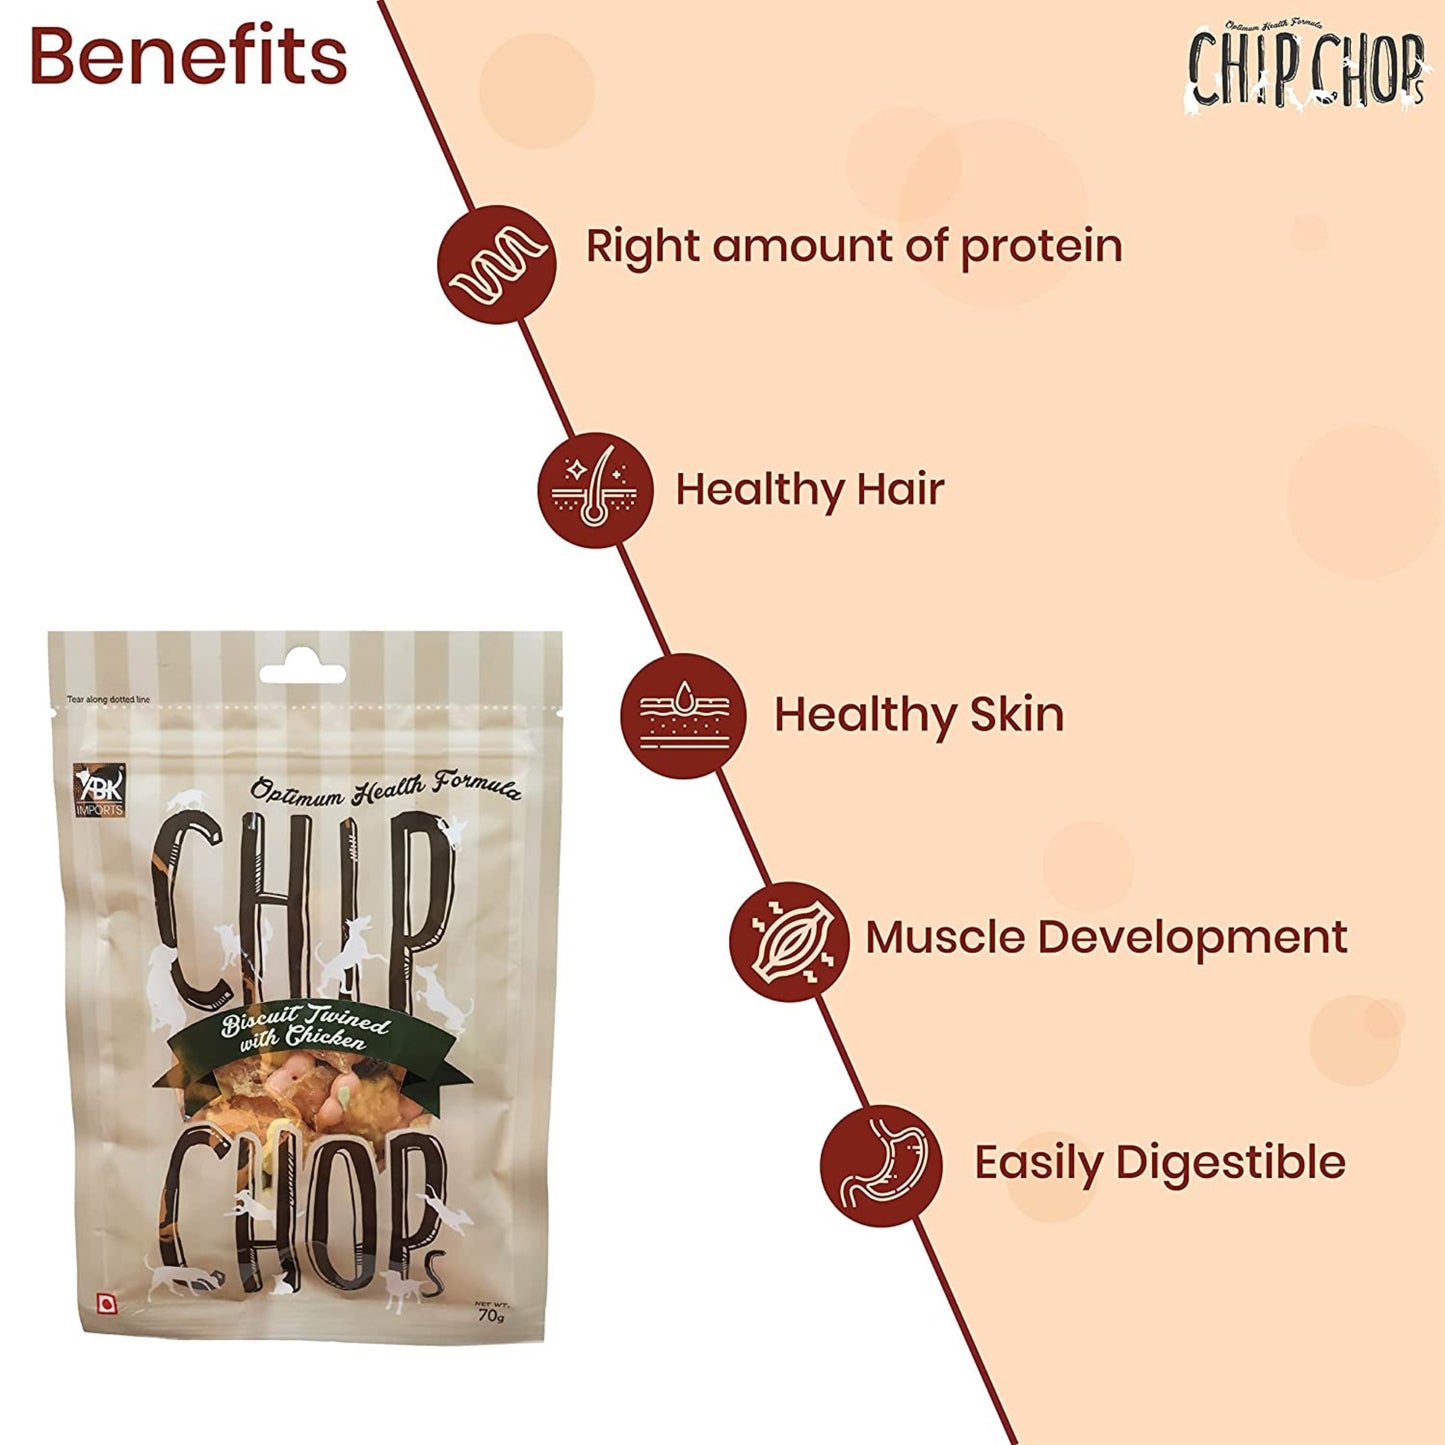 Chip Chops Dog Treats - Biscuit Twined with Chicken (70gm)